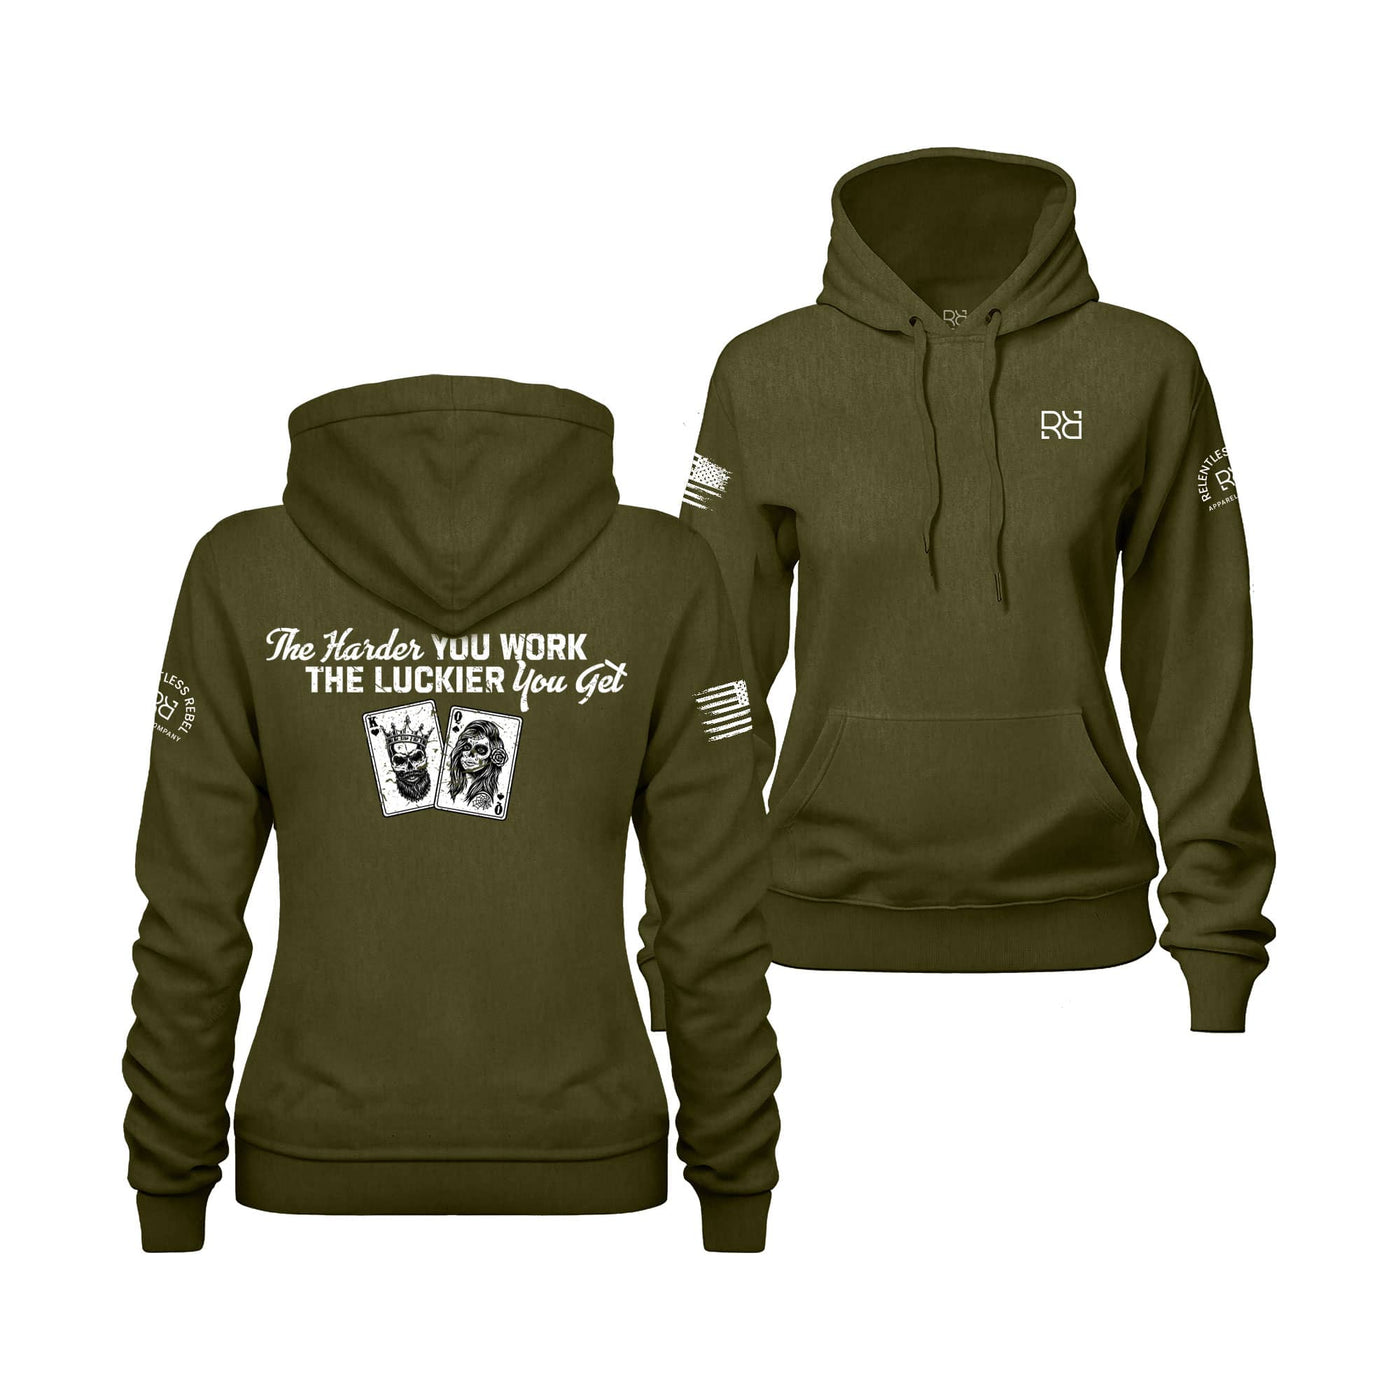 The Harder You Work - The Luckier You Get | Women's Hoodie